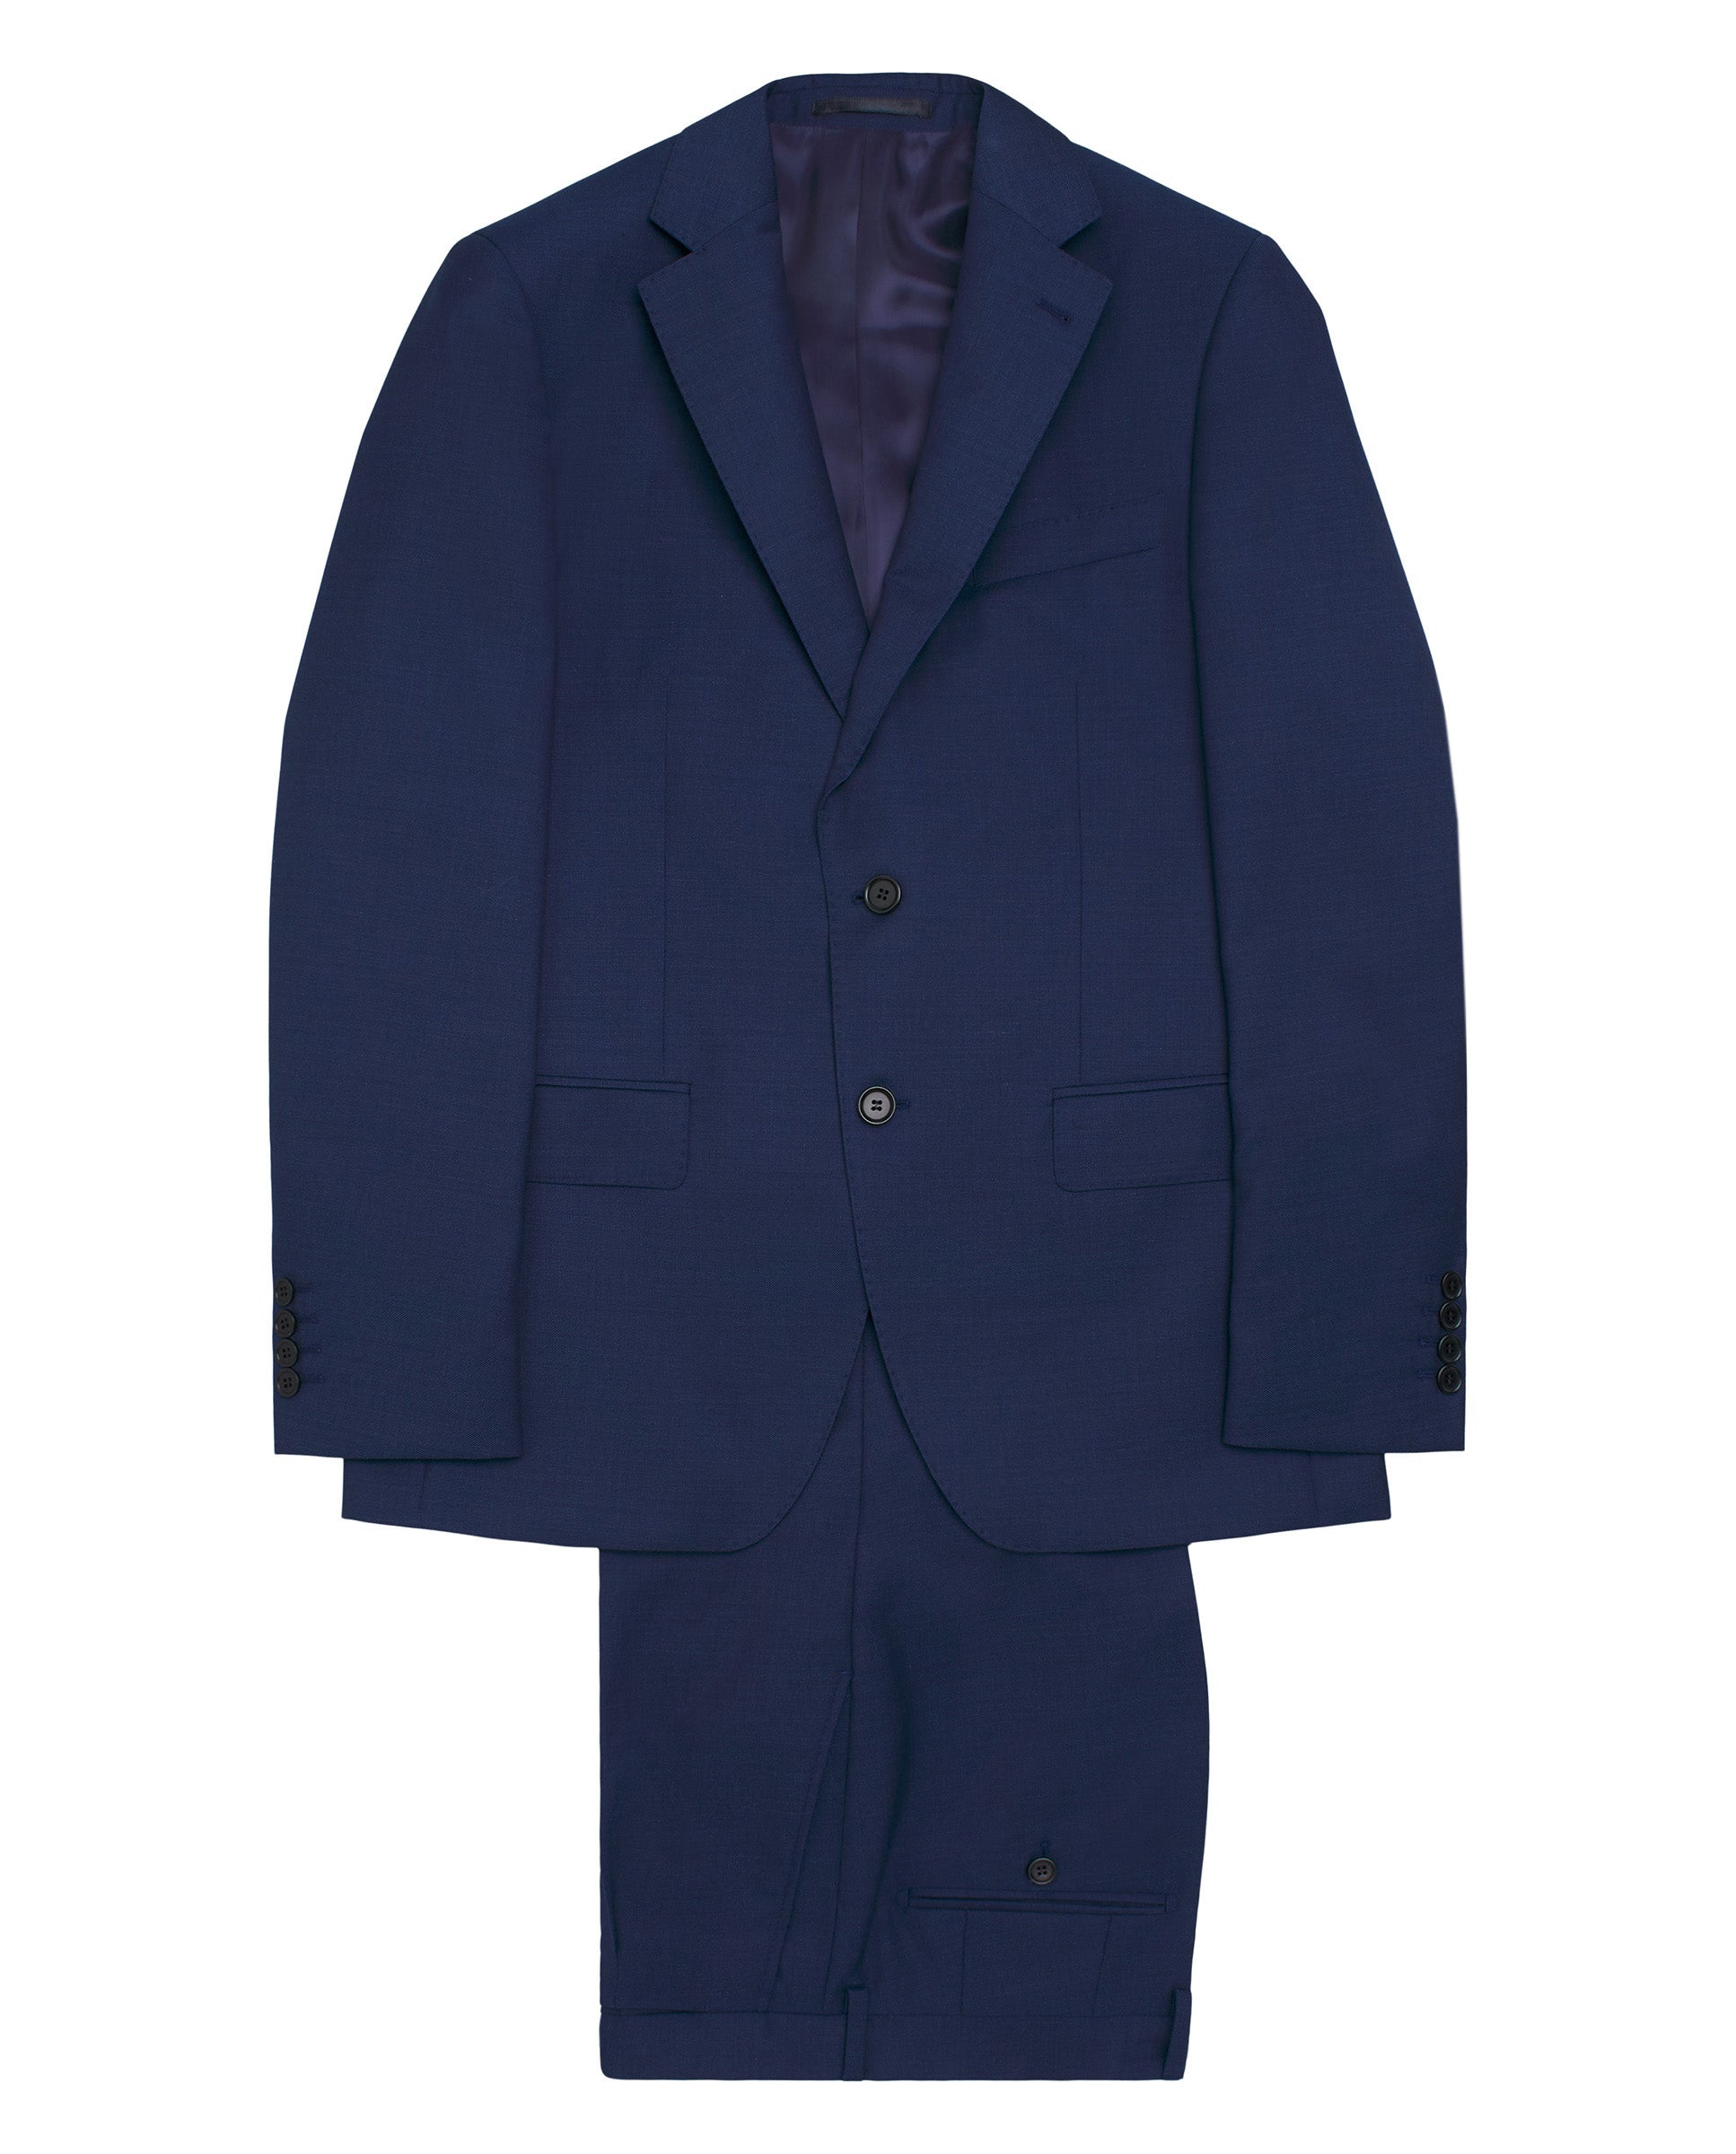 Azzure pin point wool suit by MIRTO